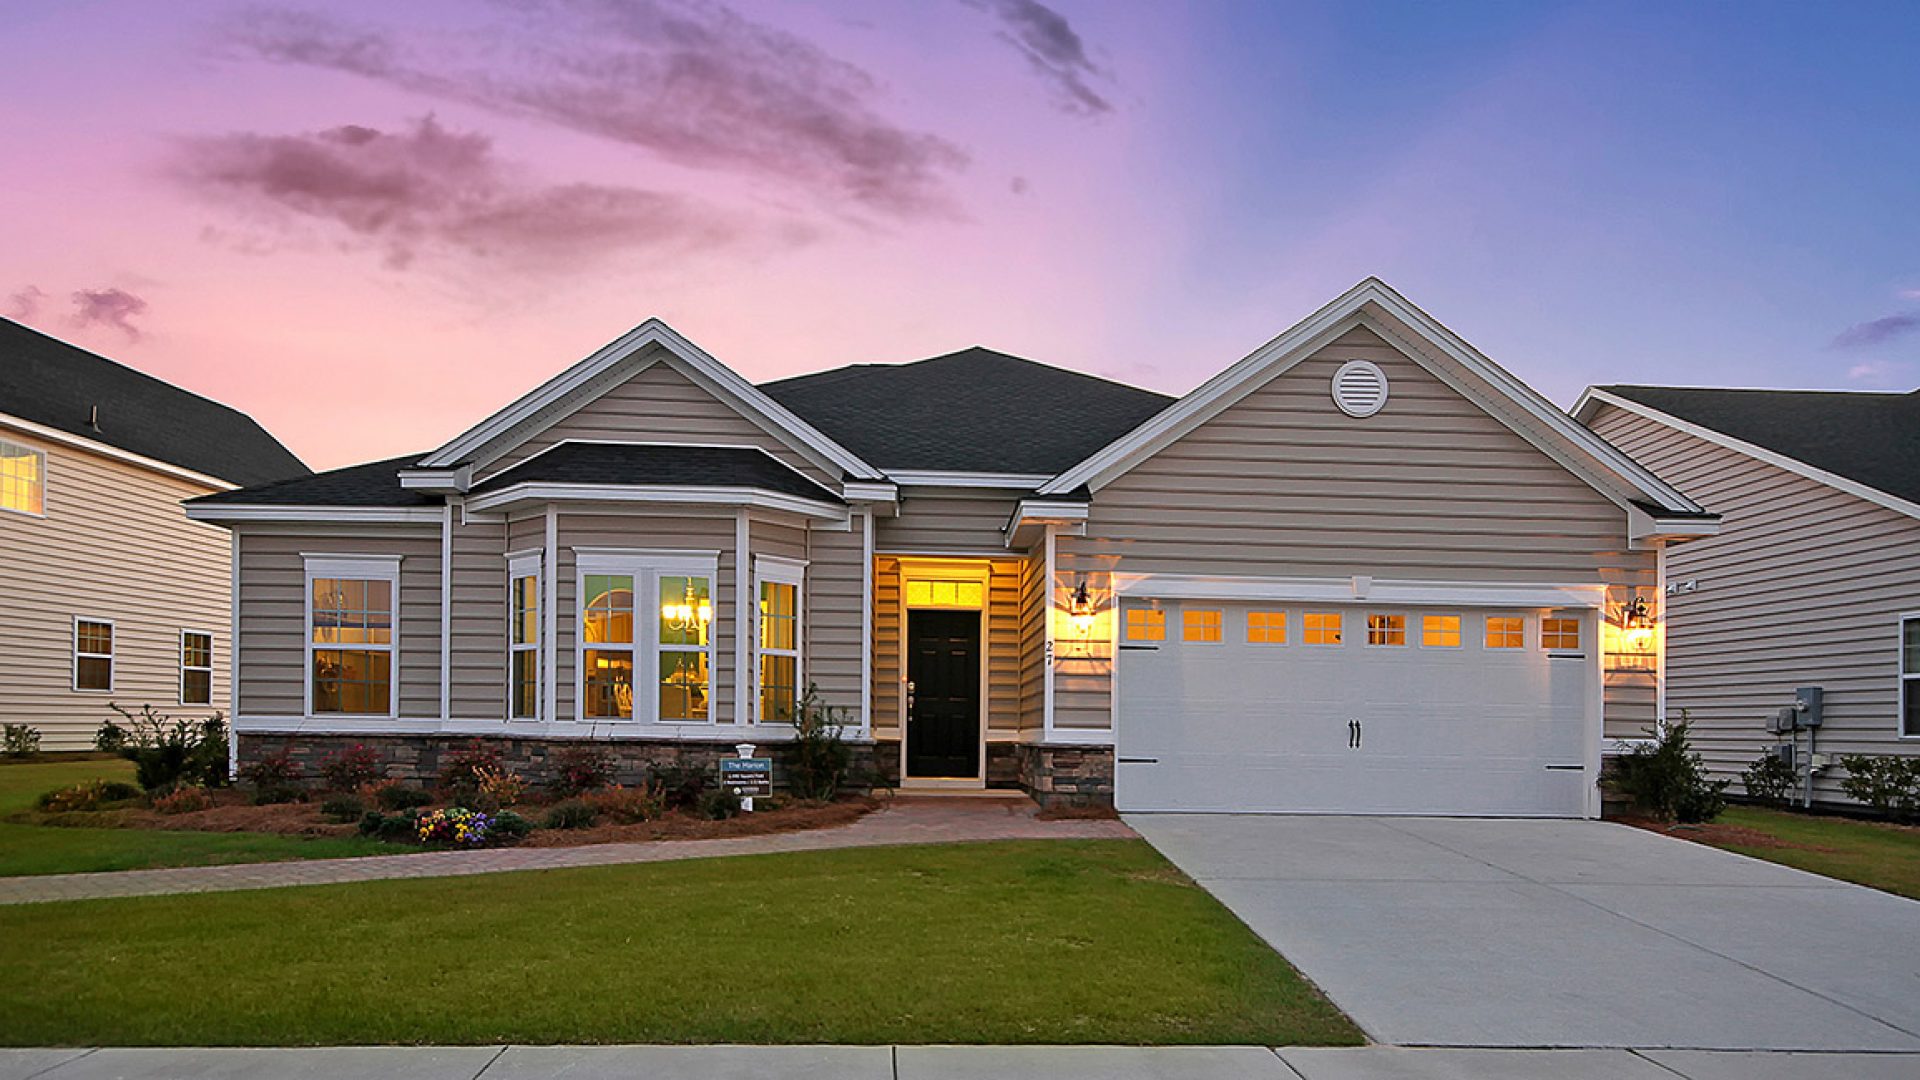 Homes in Coosaw Preserve start in the $180s are located across the street from Joseph Pye Elementary.